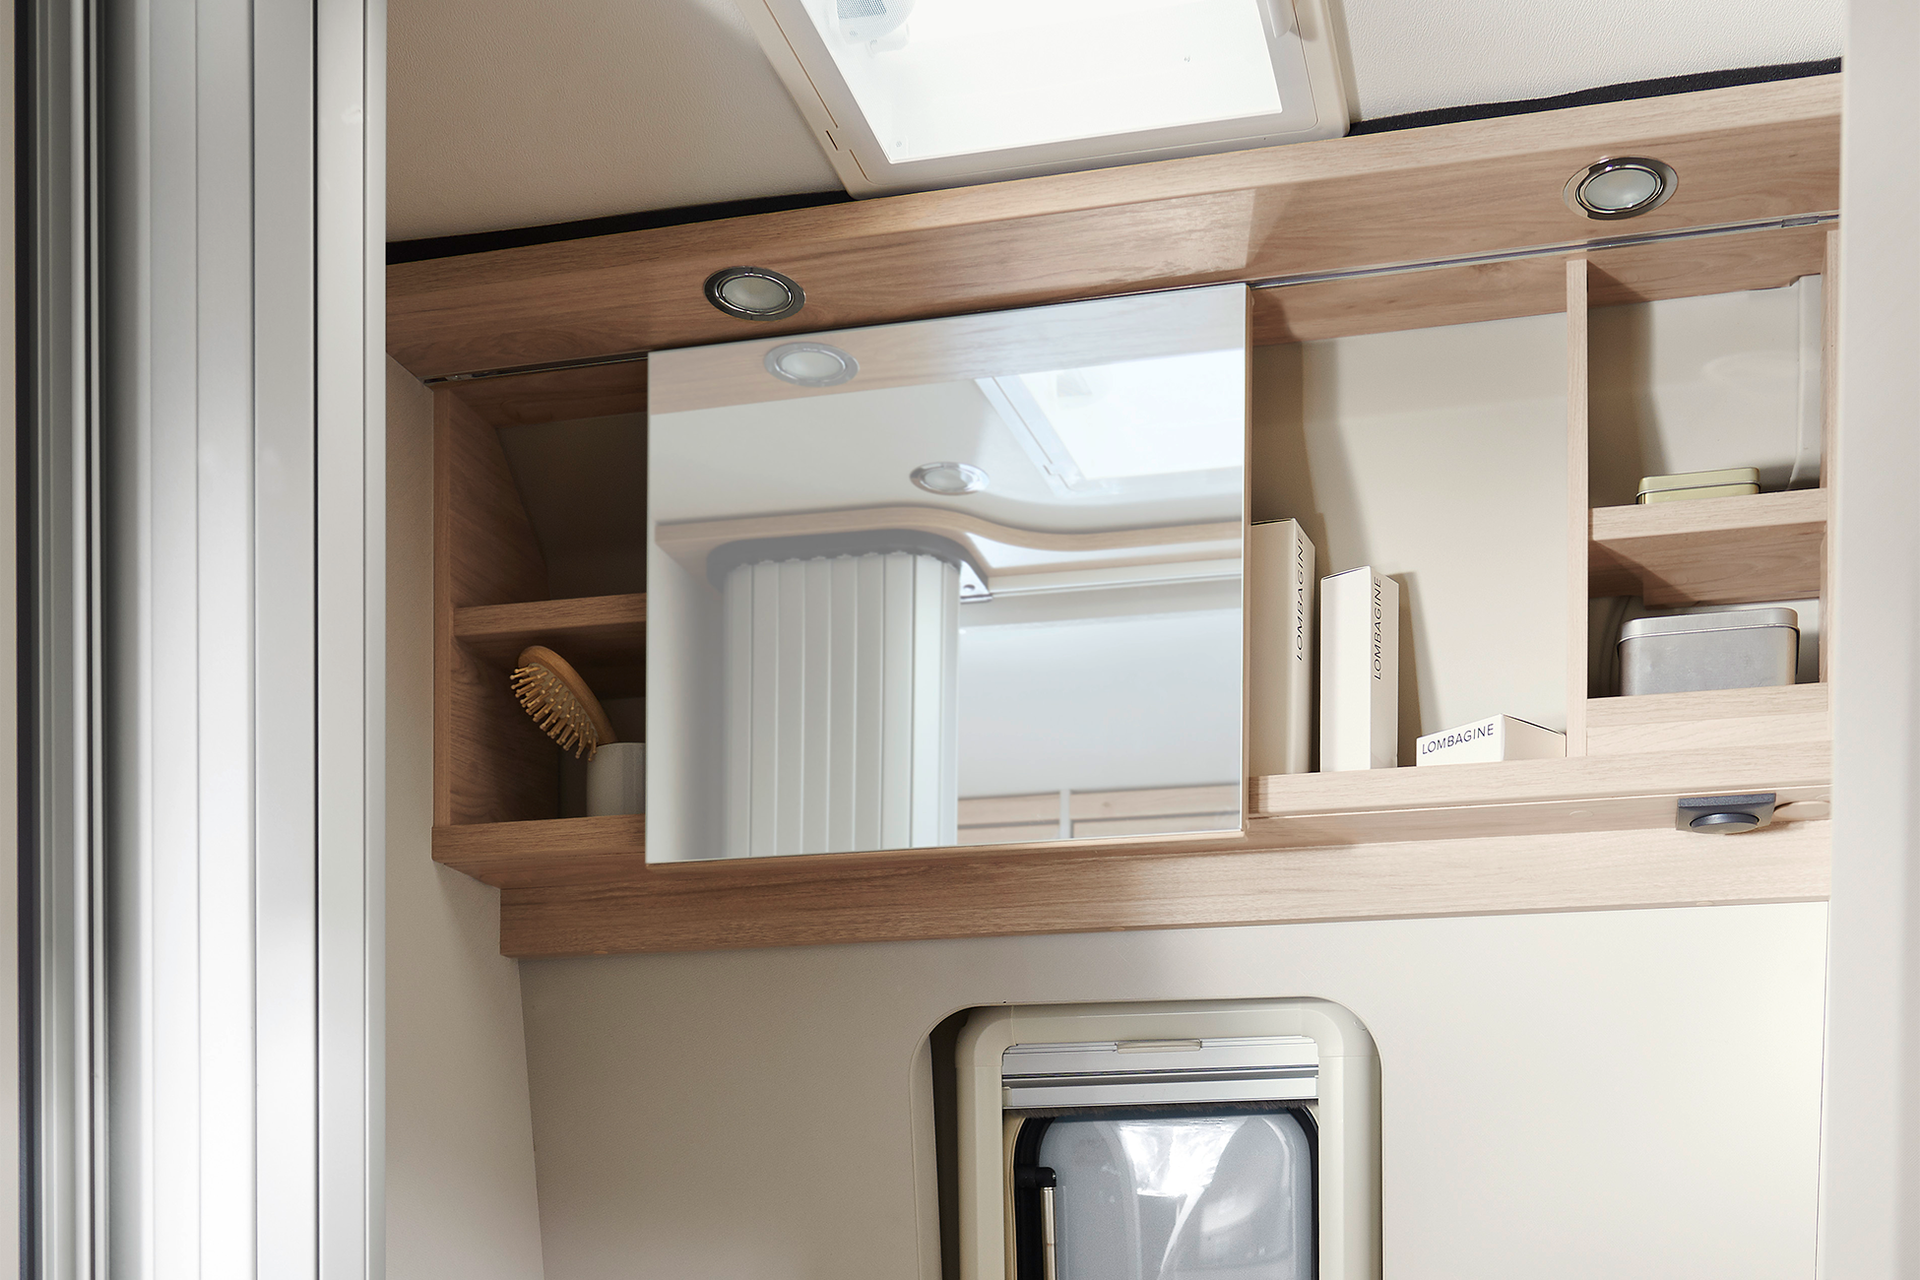 The bathroom features an overhead wall unit with plenty of storage space – individual items can be secured with smart rubber bands or by the sliding mirror door, which can be easily pushed to the side without restricting headroom.